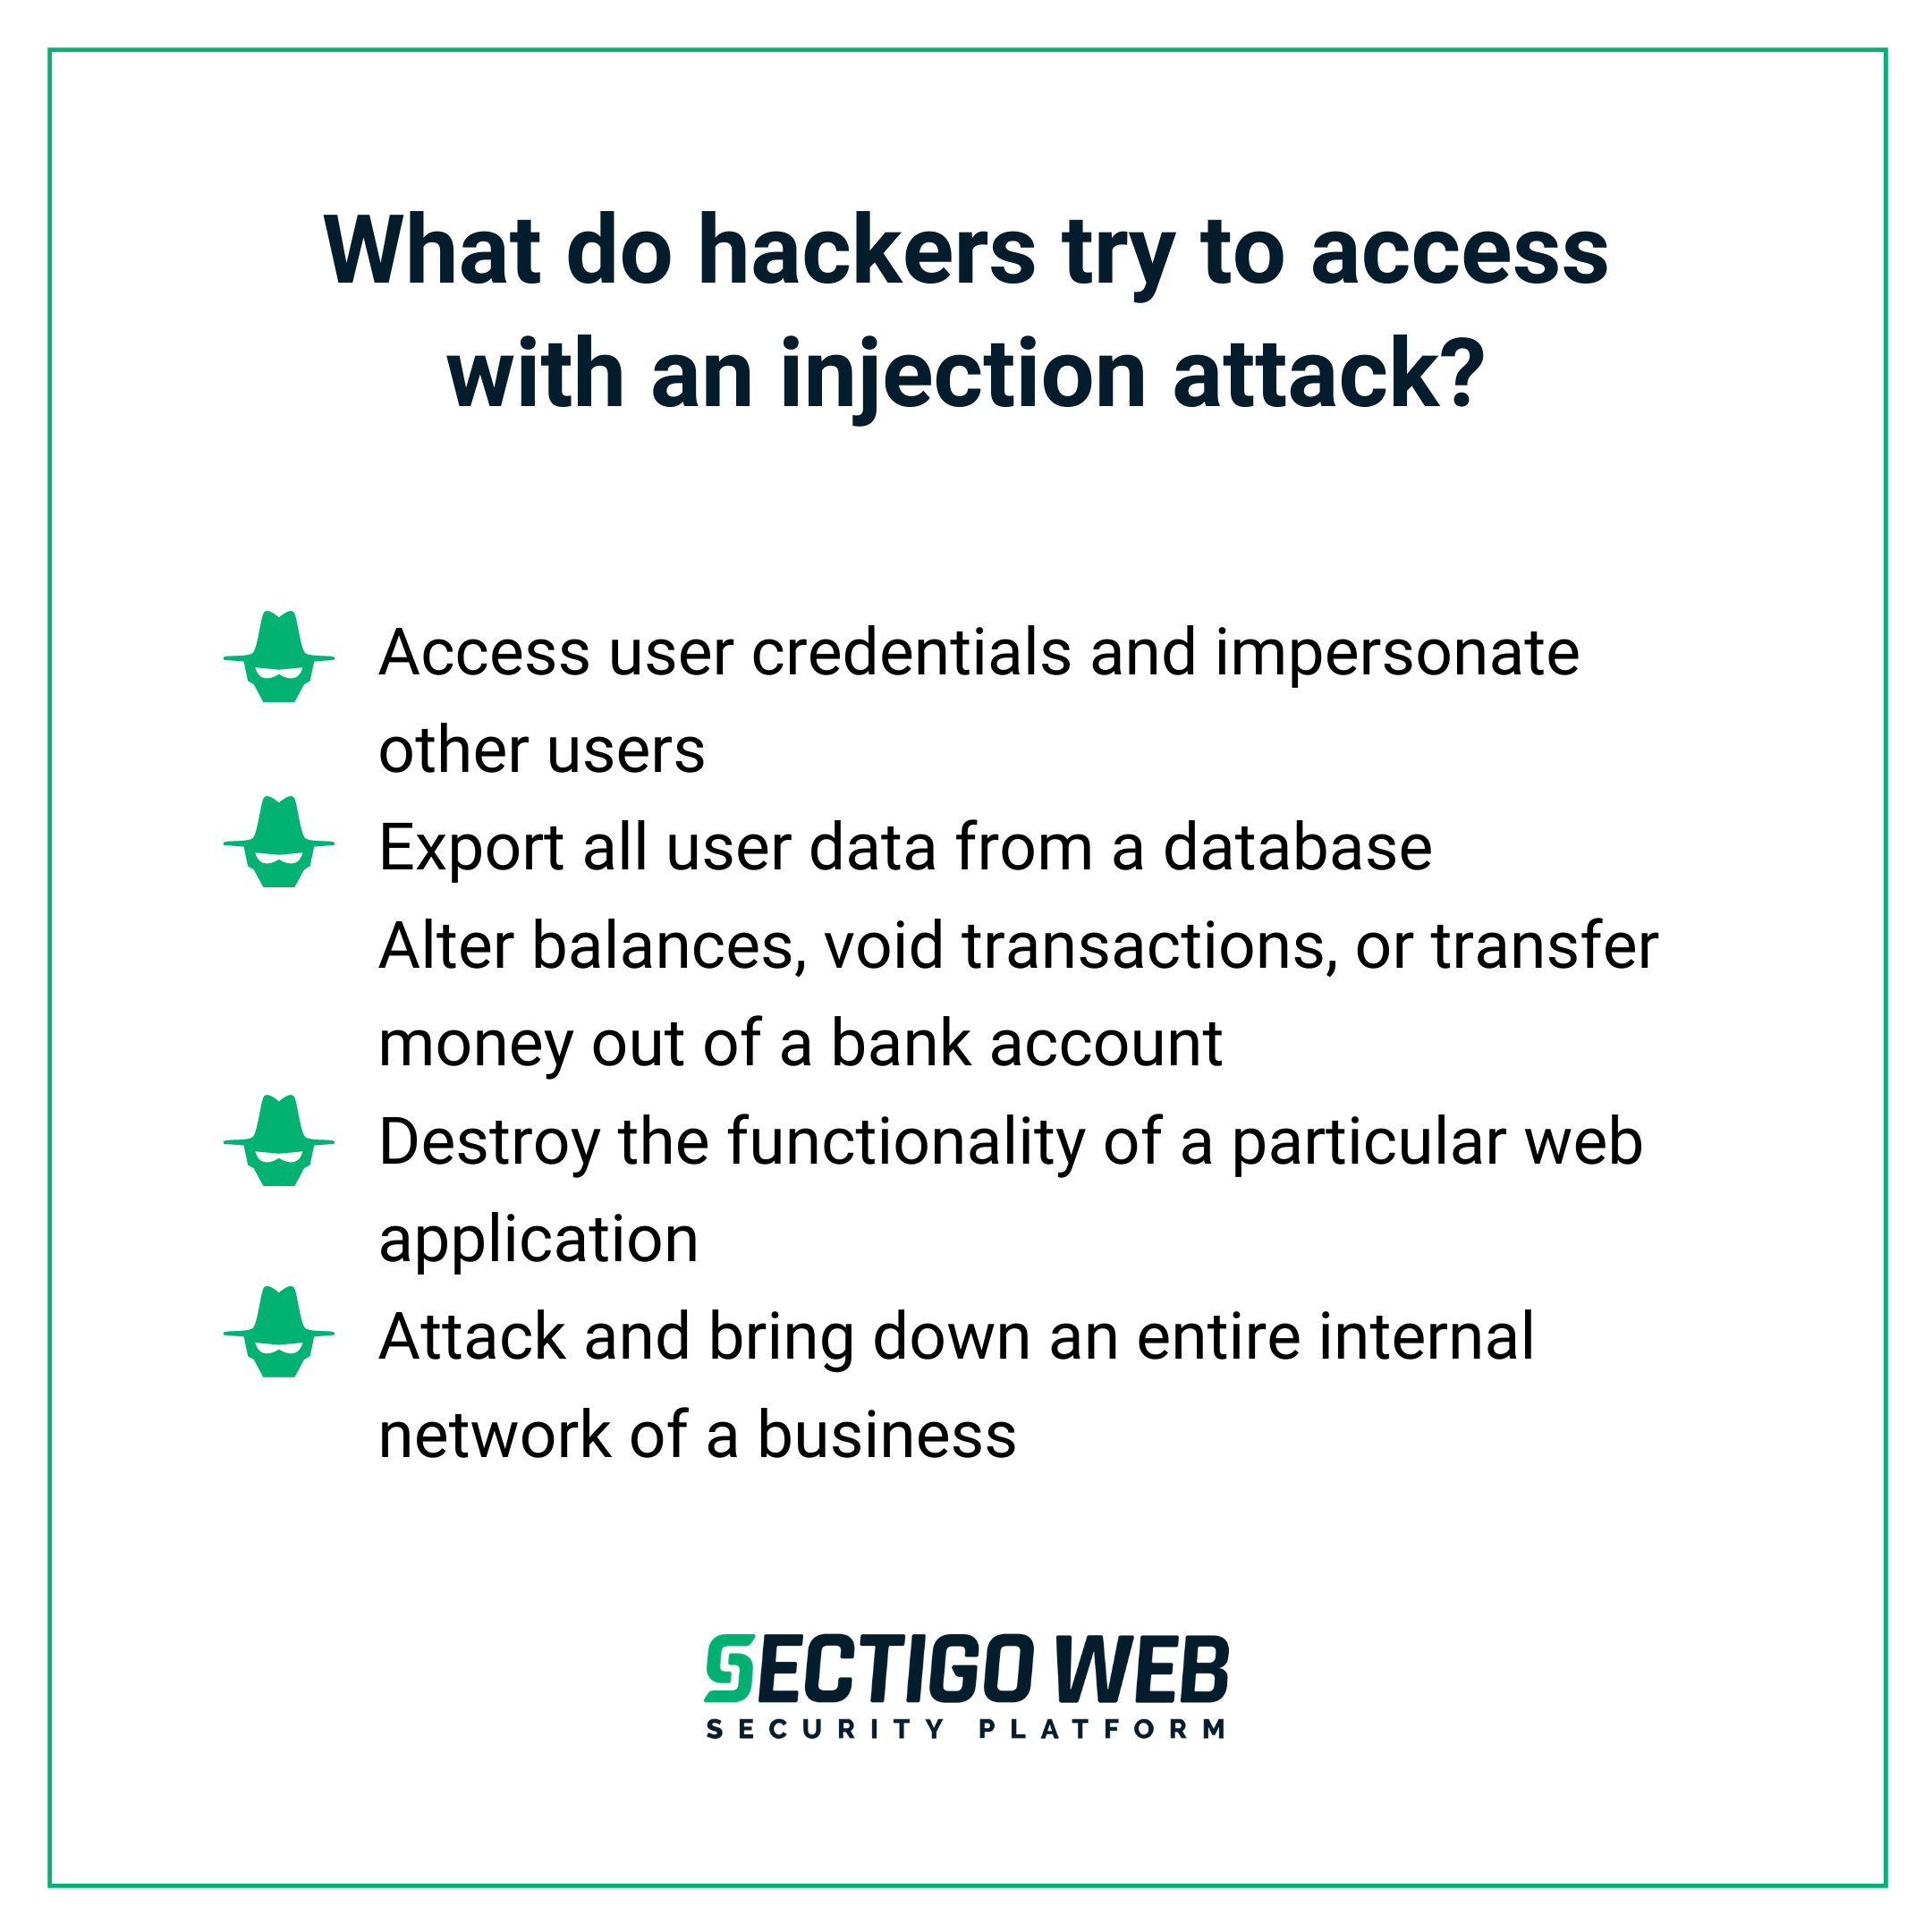 What do hackers try to access with an injection attack?